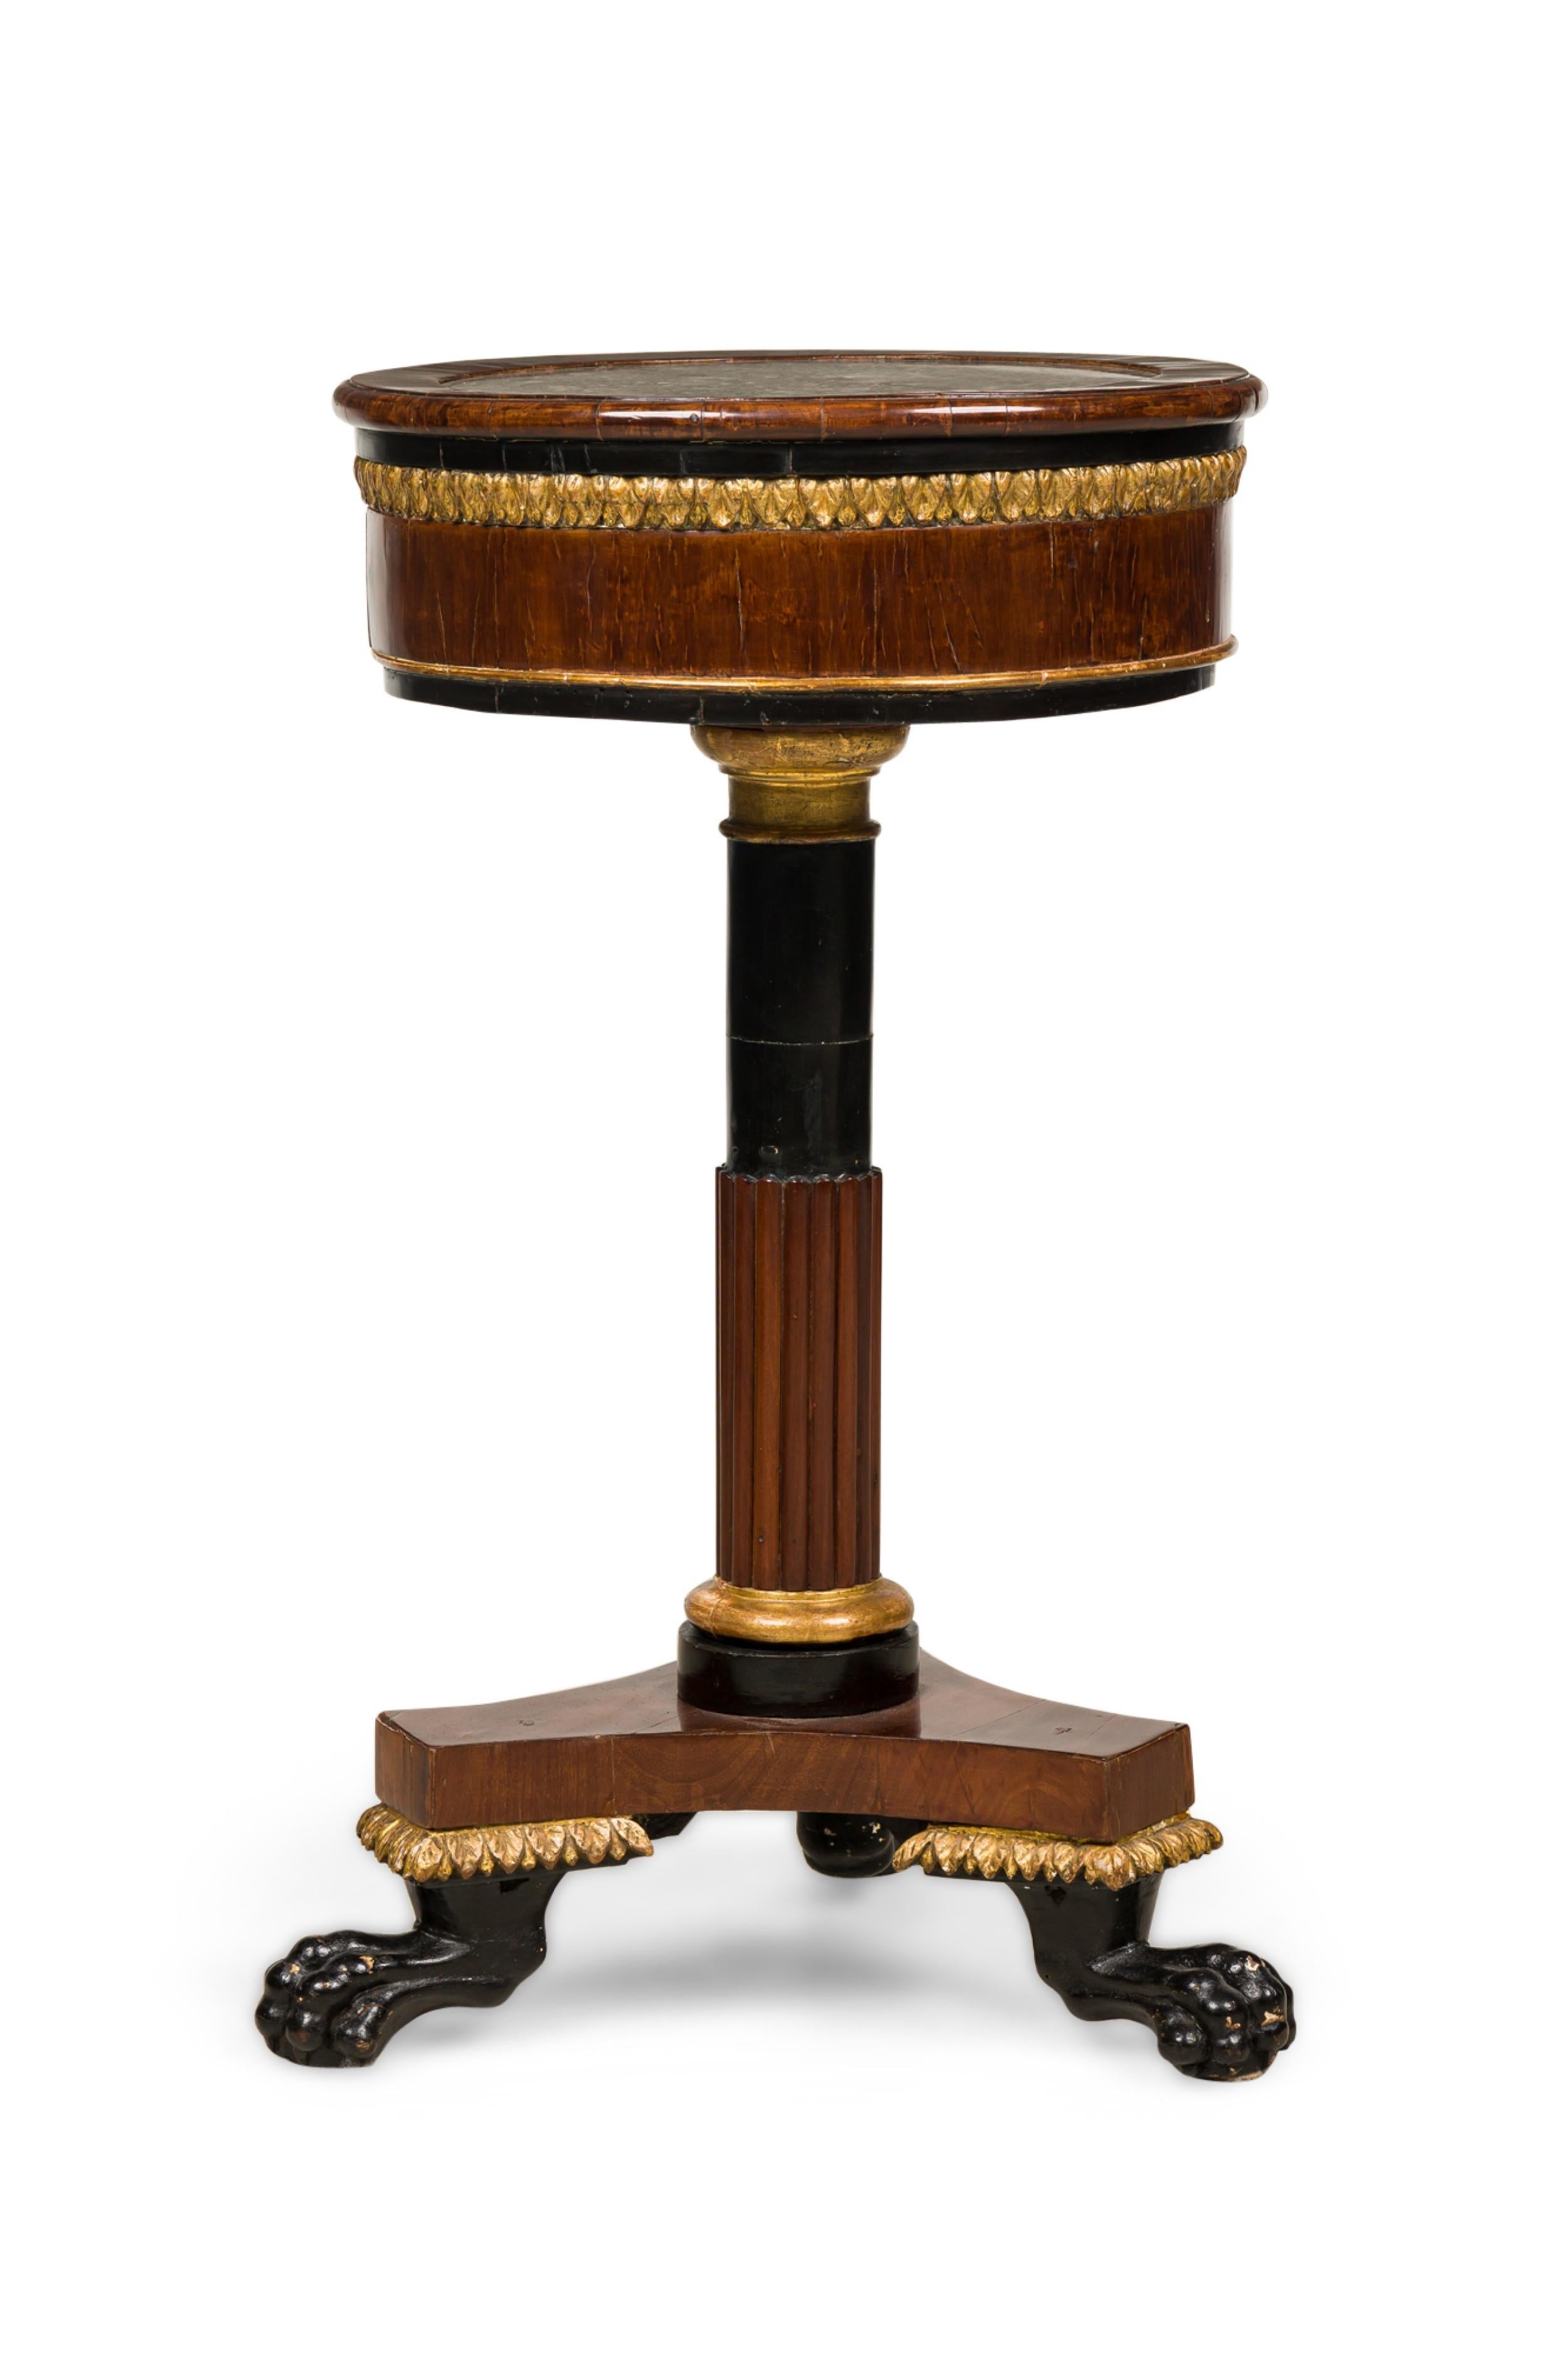 Pair of Italian Neoclassicalal Mahogany and Marble Gueirdon End Table For Sale 1